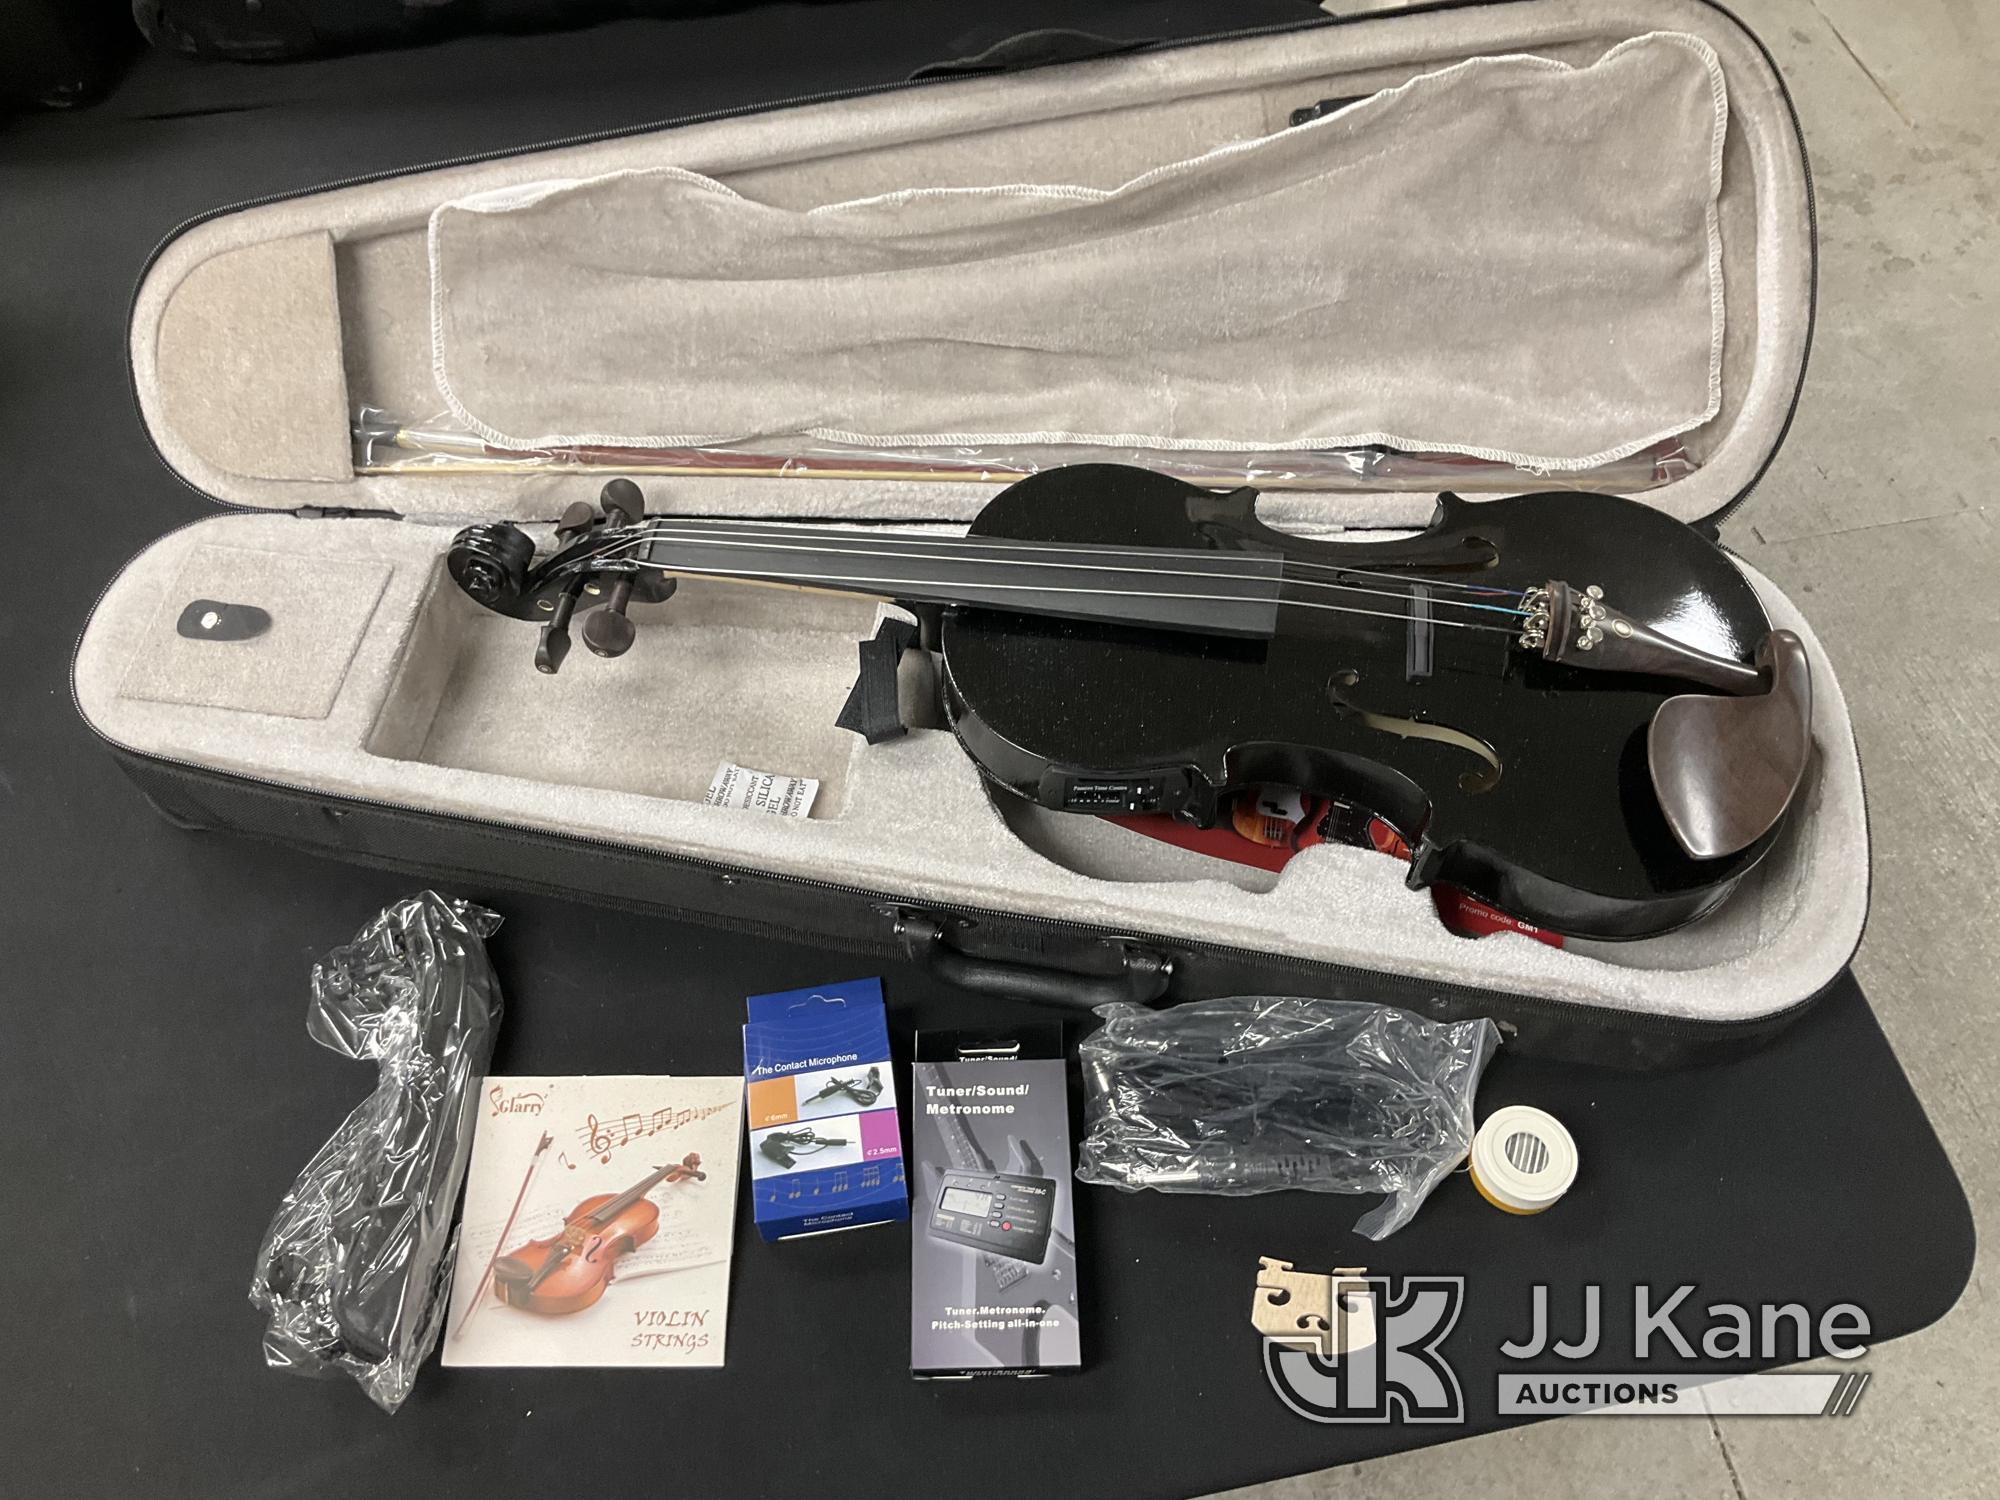 (Jurupa Valley, CA) Violin (New) NOTE: This unit is being sold AS IS/WHERE IS via Timed Auction and